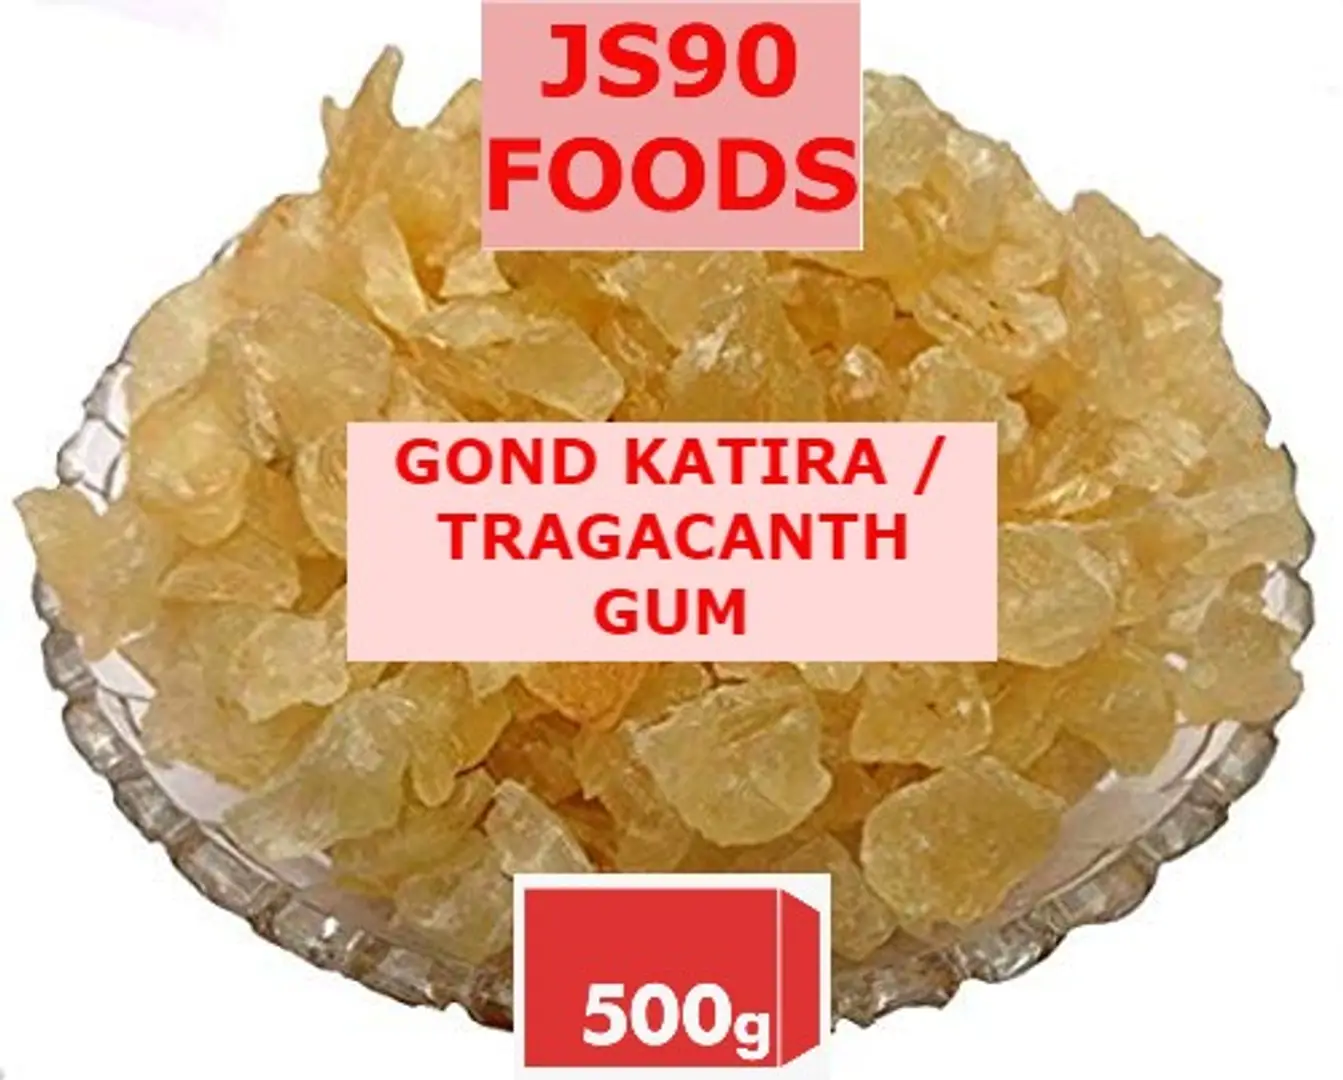 Gond Katira (Gum Tragacanth) the traditional cooling agent for summers